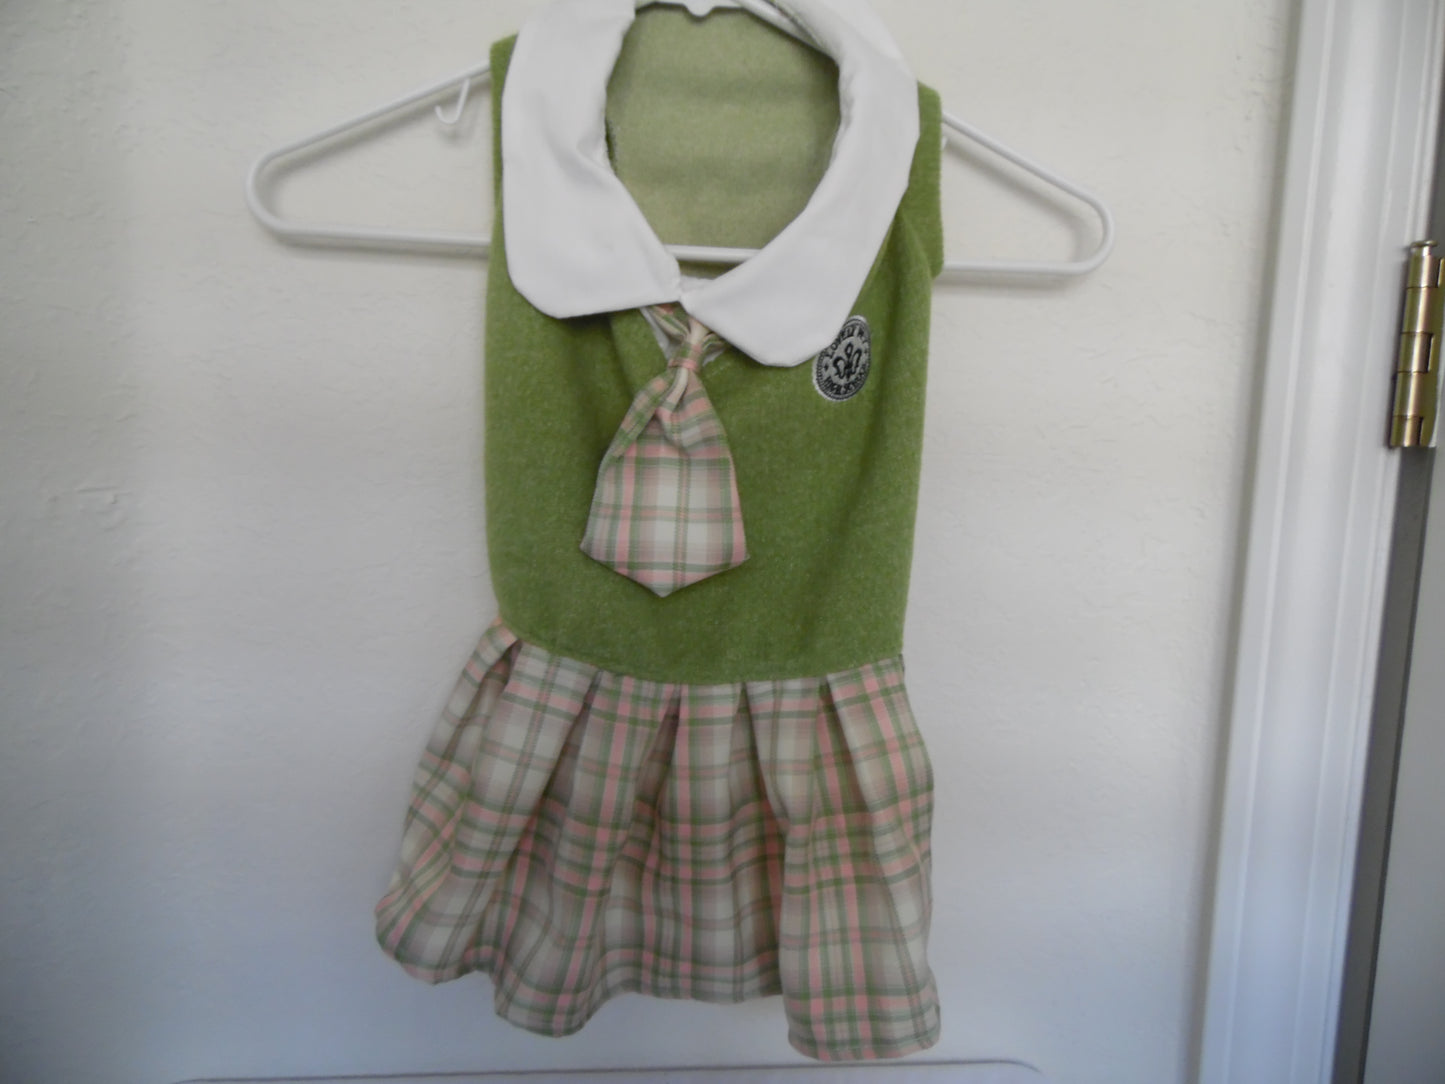 Dog Plaid Sweater Dress with Tie 2XL Pullover Knitwear for Small Dogs Girl Cold Weather Sweater with Leash Hole